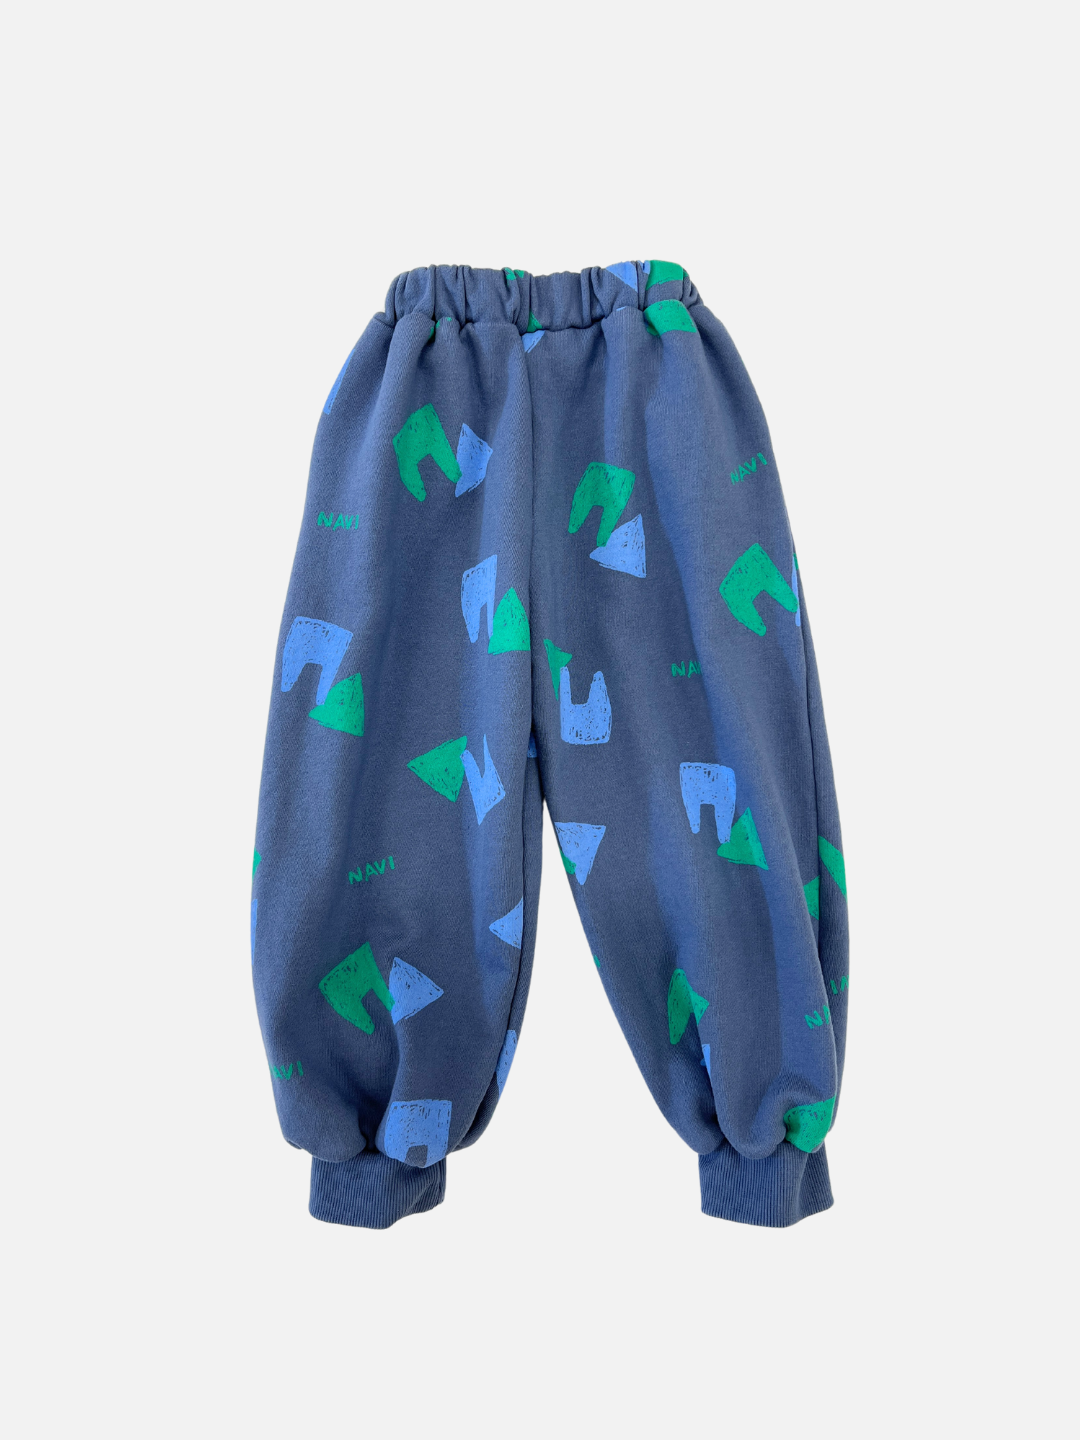 Vintage Blue | Back view of kids blue sweatpants with an all over pattern of green and blue shapes and the brand name Navi.